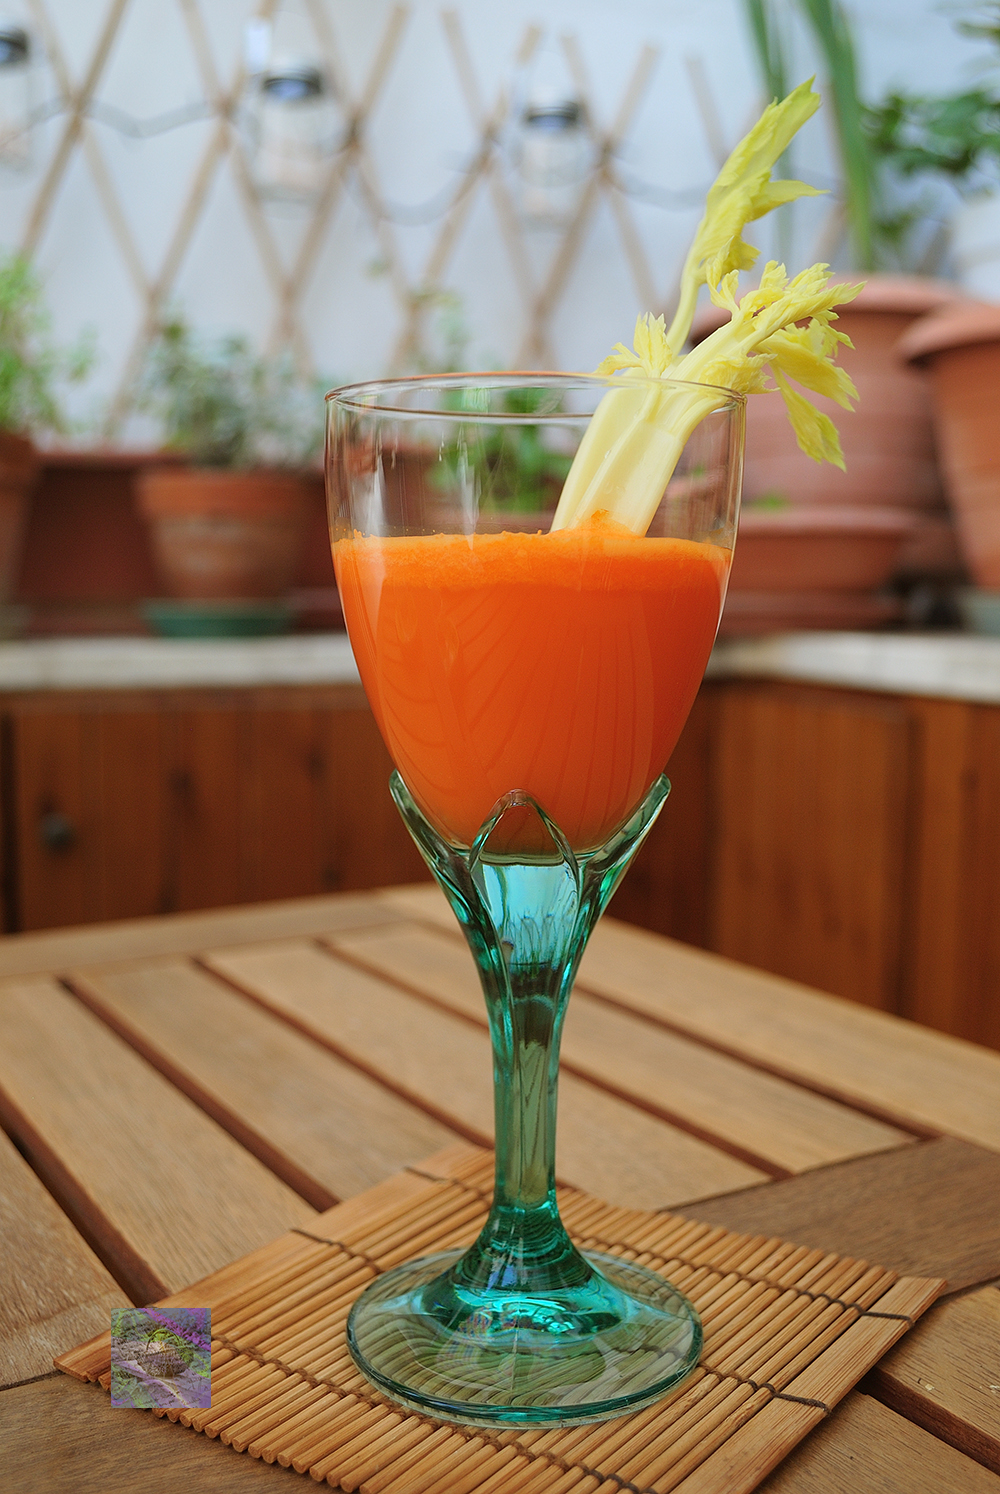 Carrot juice – Summer trend or healthy life style?